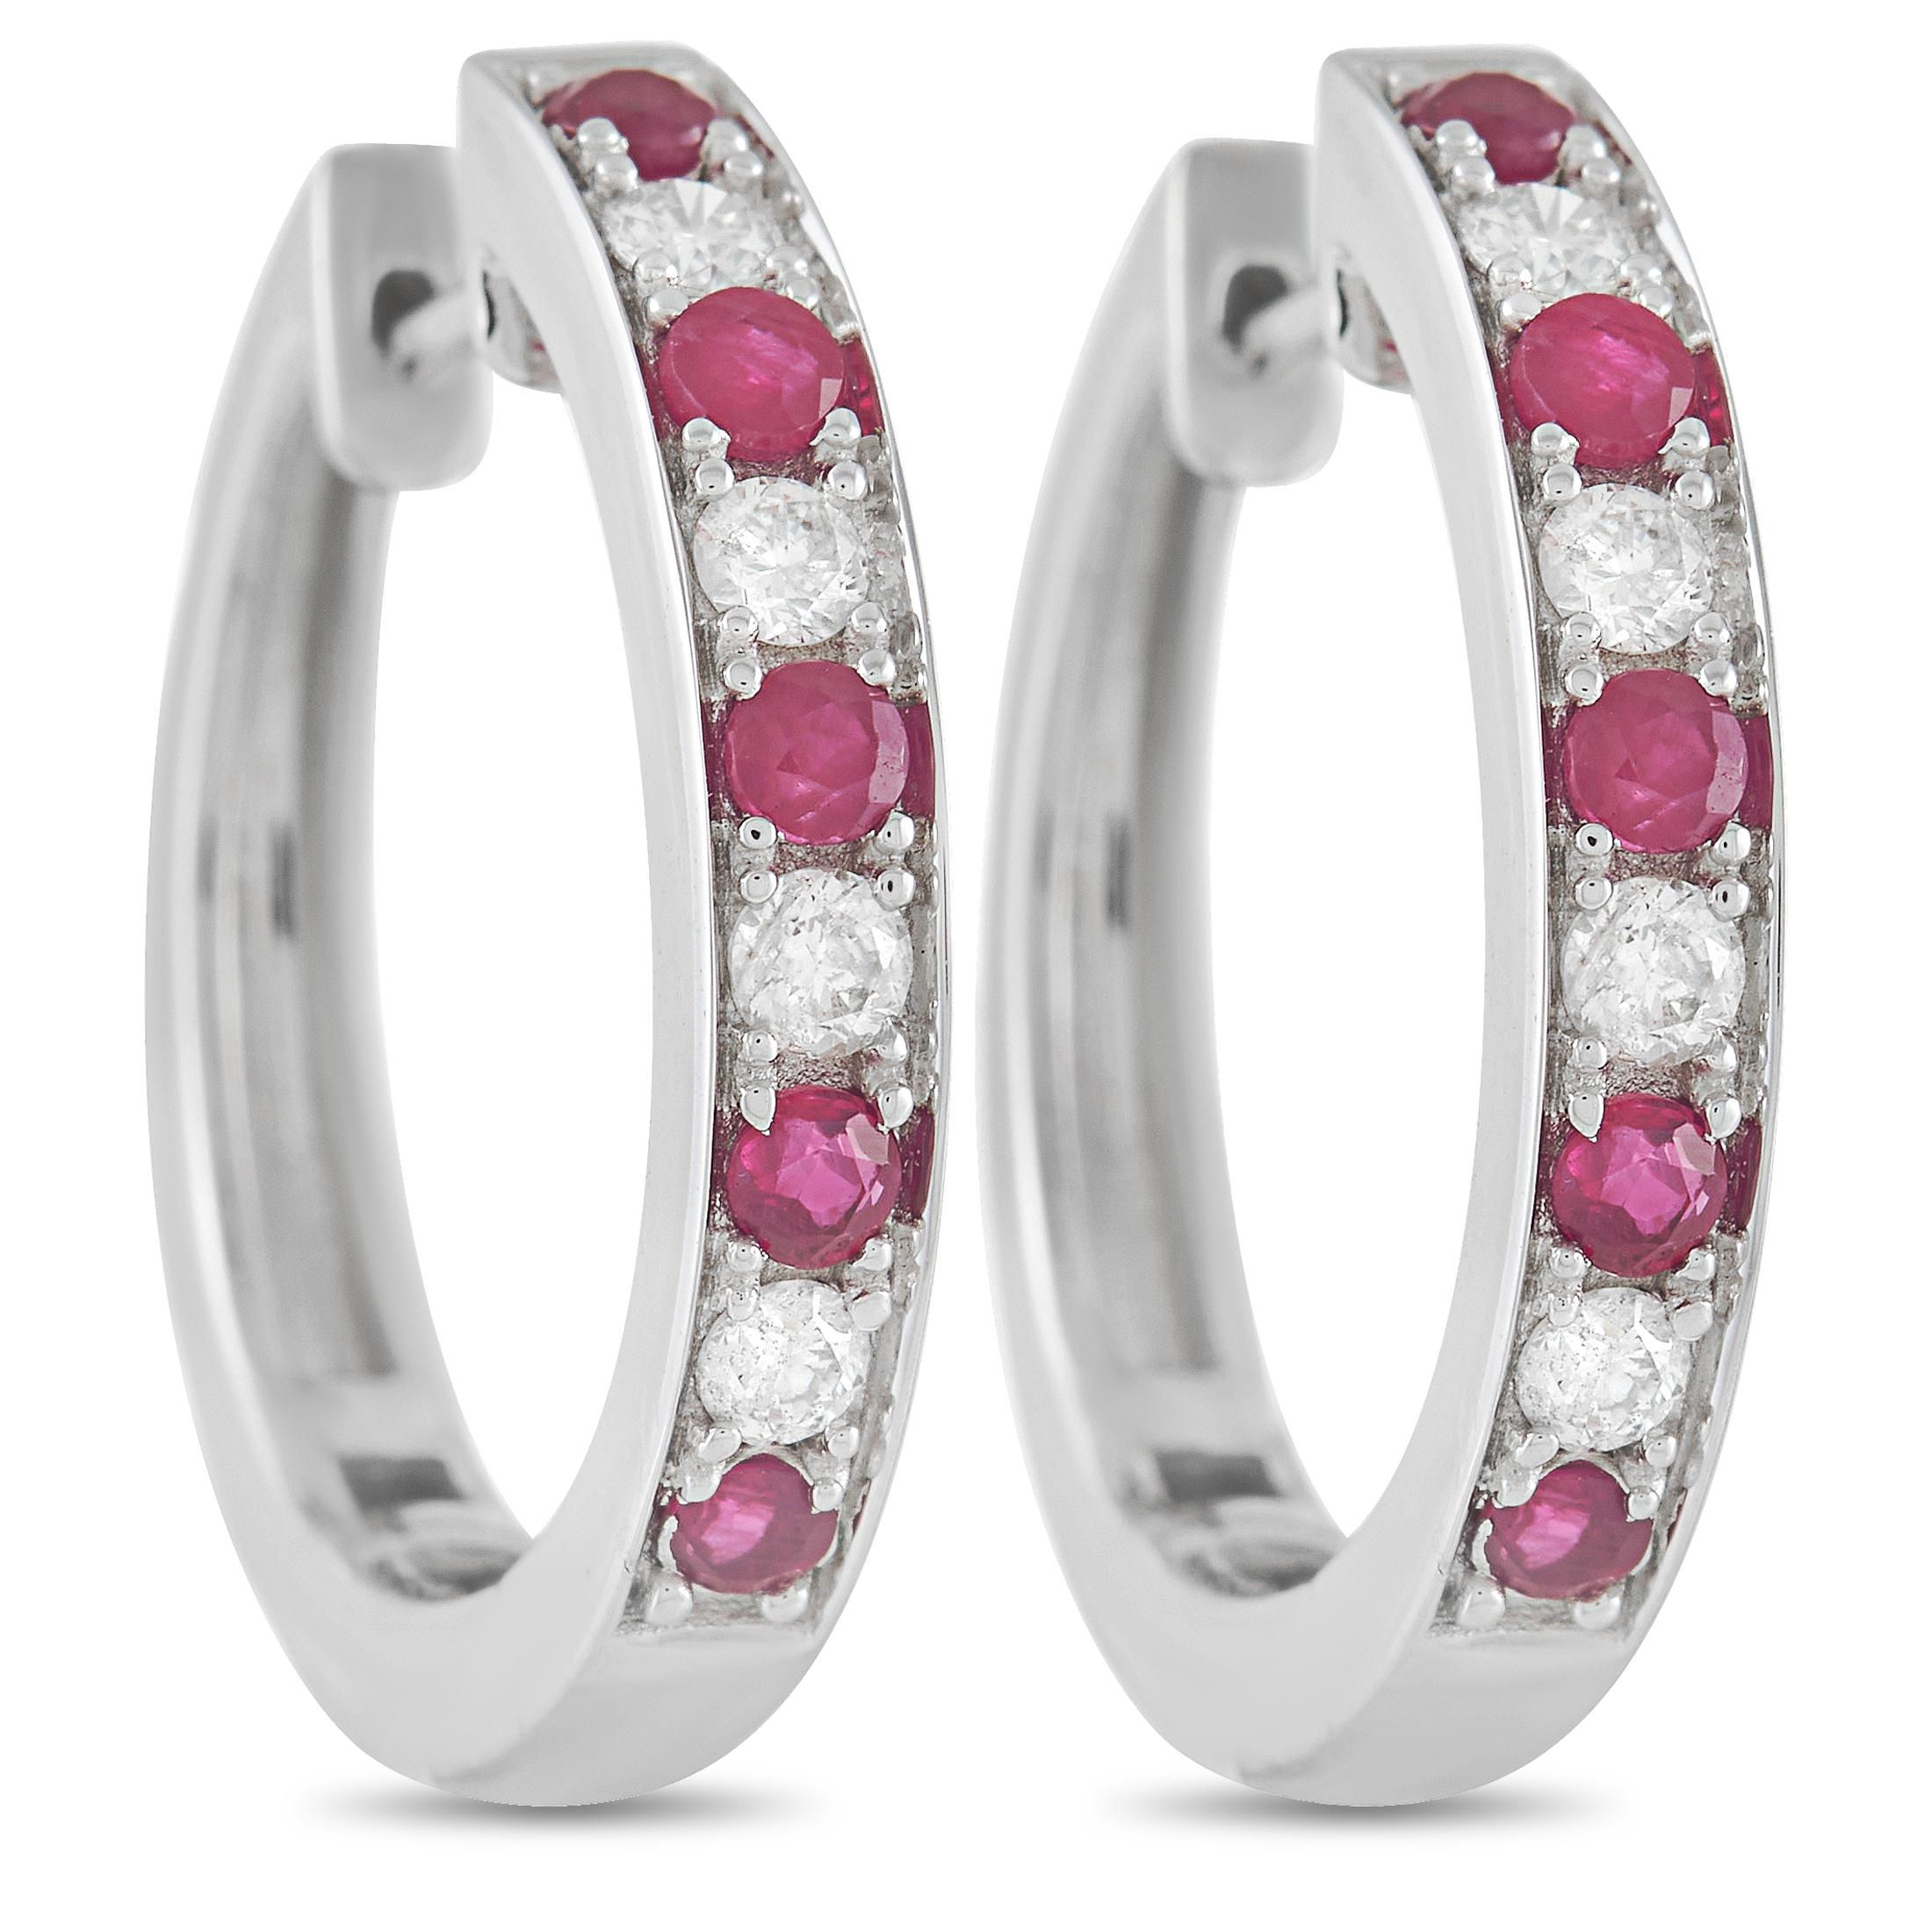 LB Exclusive 14K White Gold 0.25 Ct Diamond and 0.42 Ct Ruby Hoop Earrings In New Condition For Sale In Southampton, PA